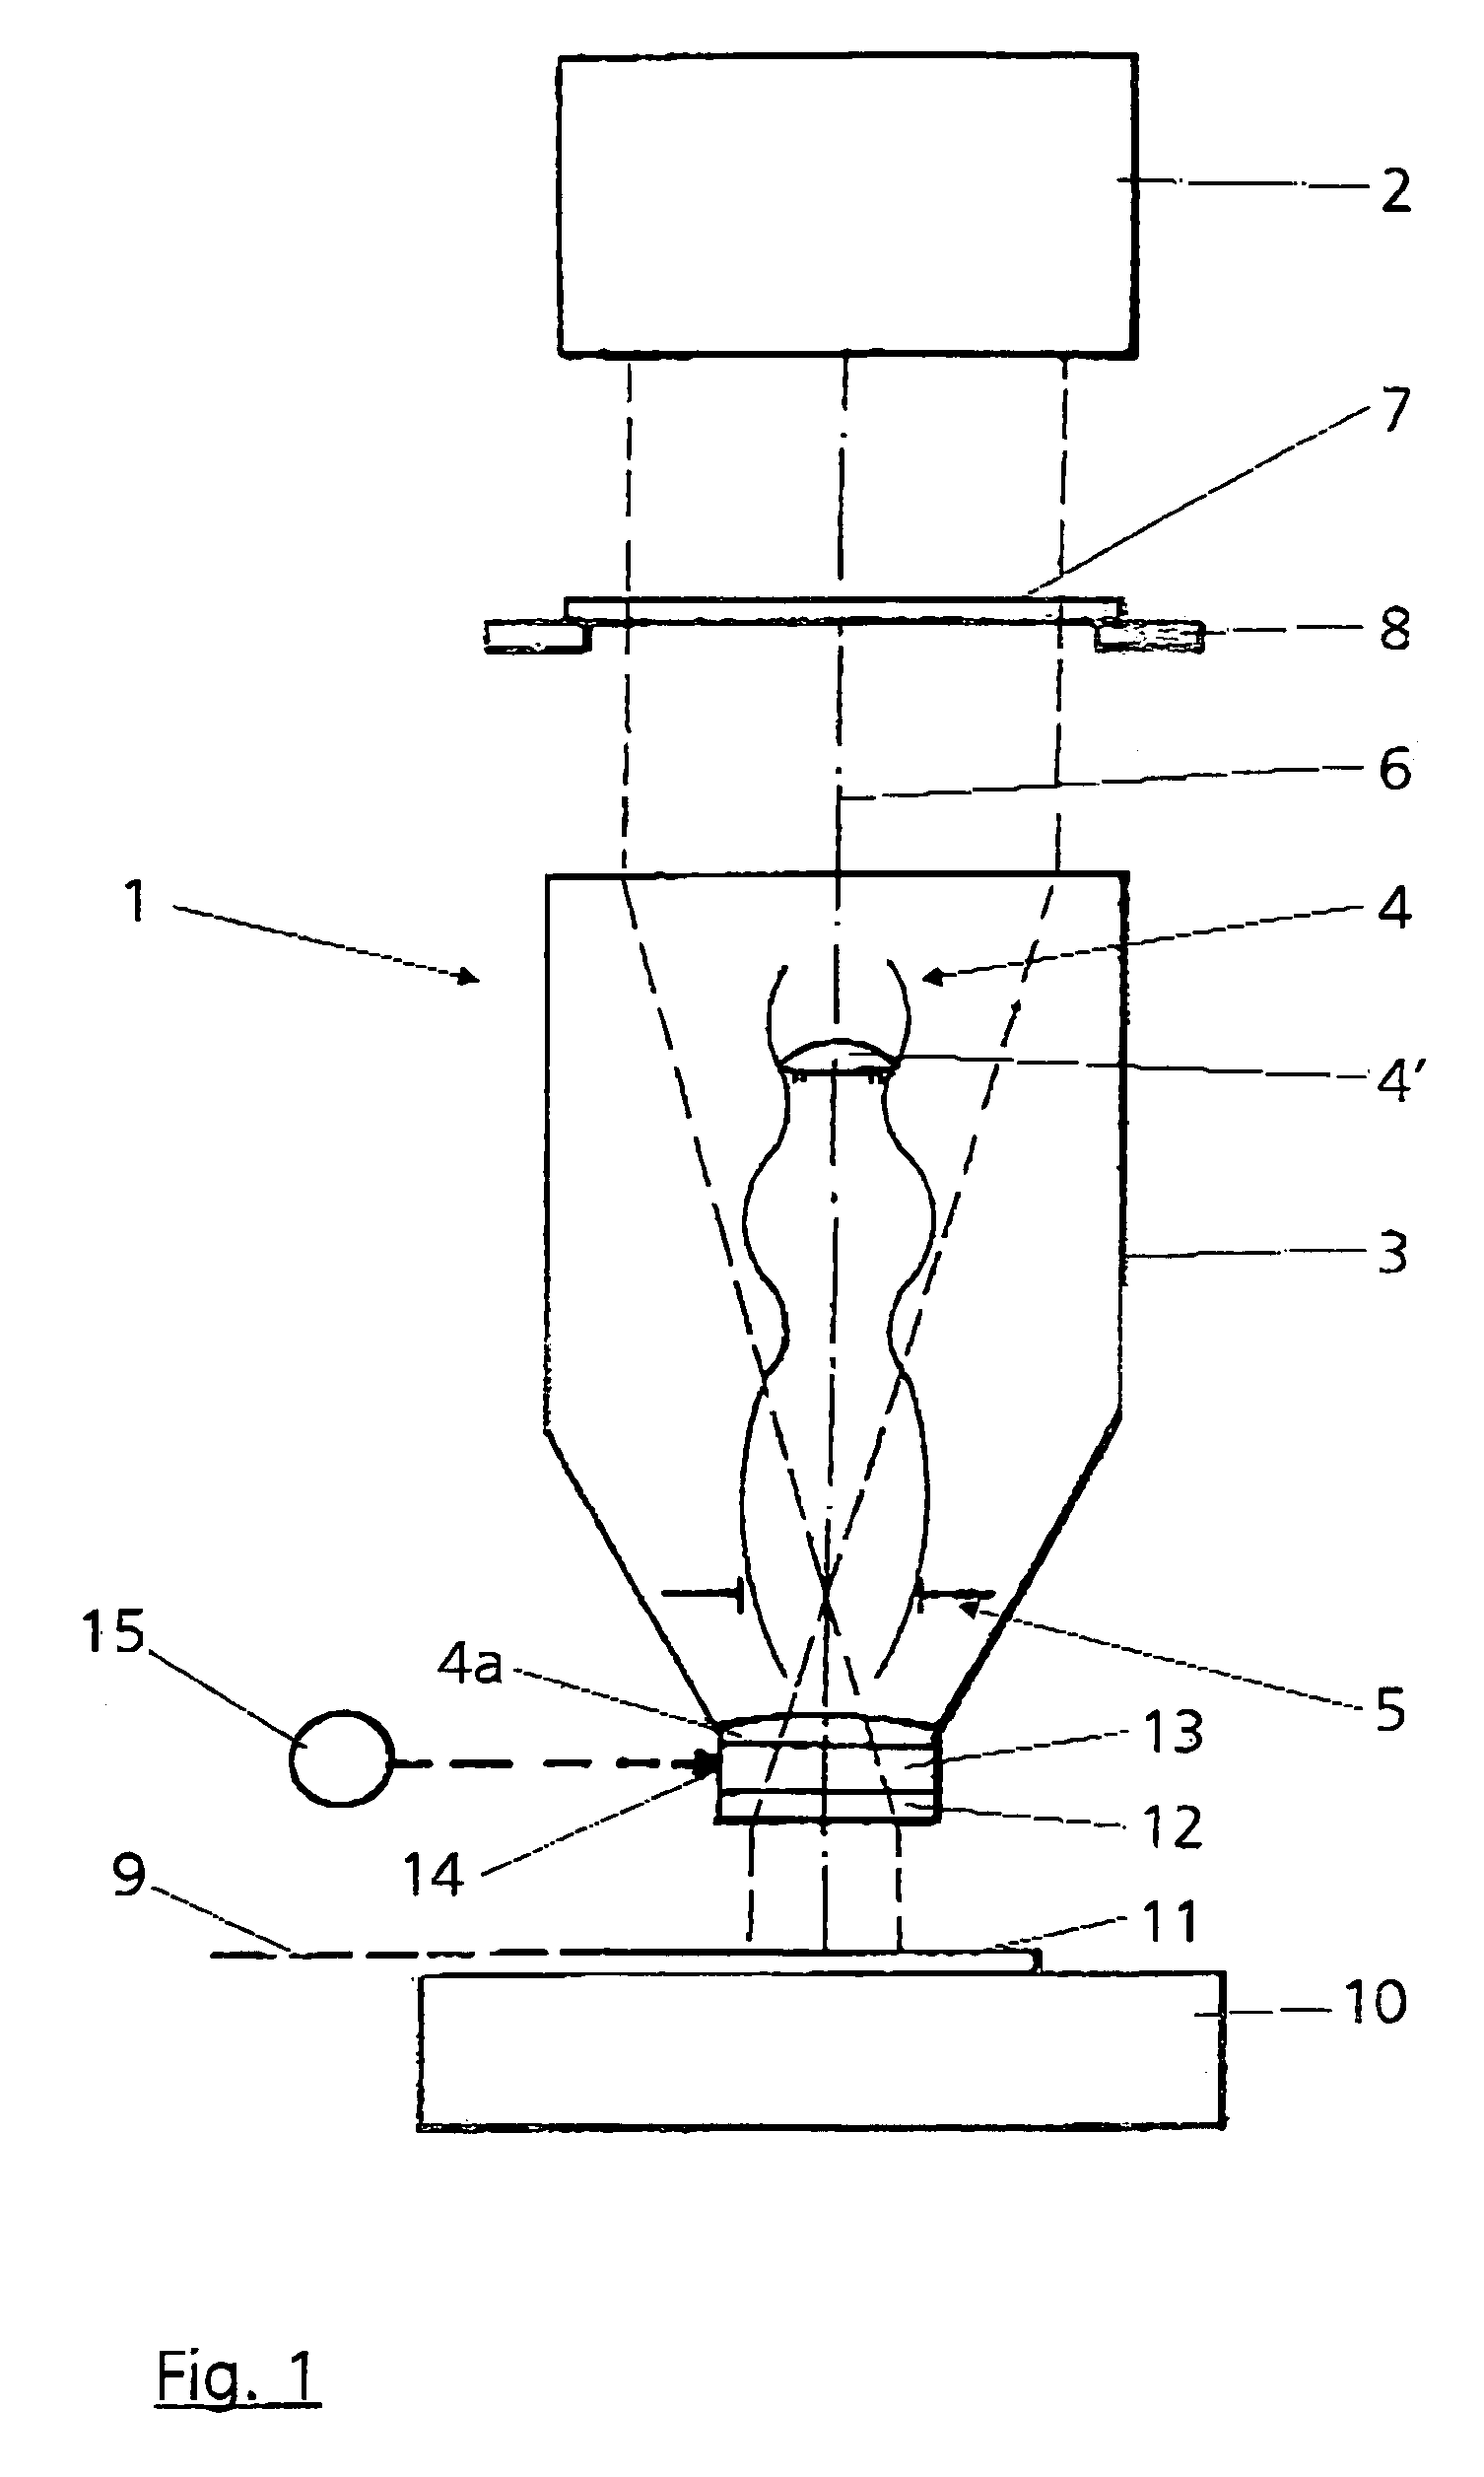 Projection exposure machine comprising a projection lens